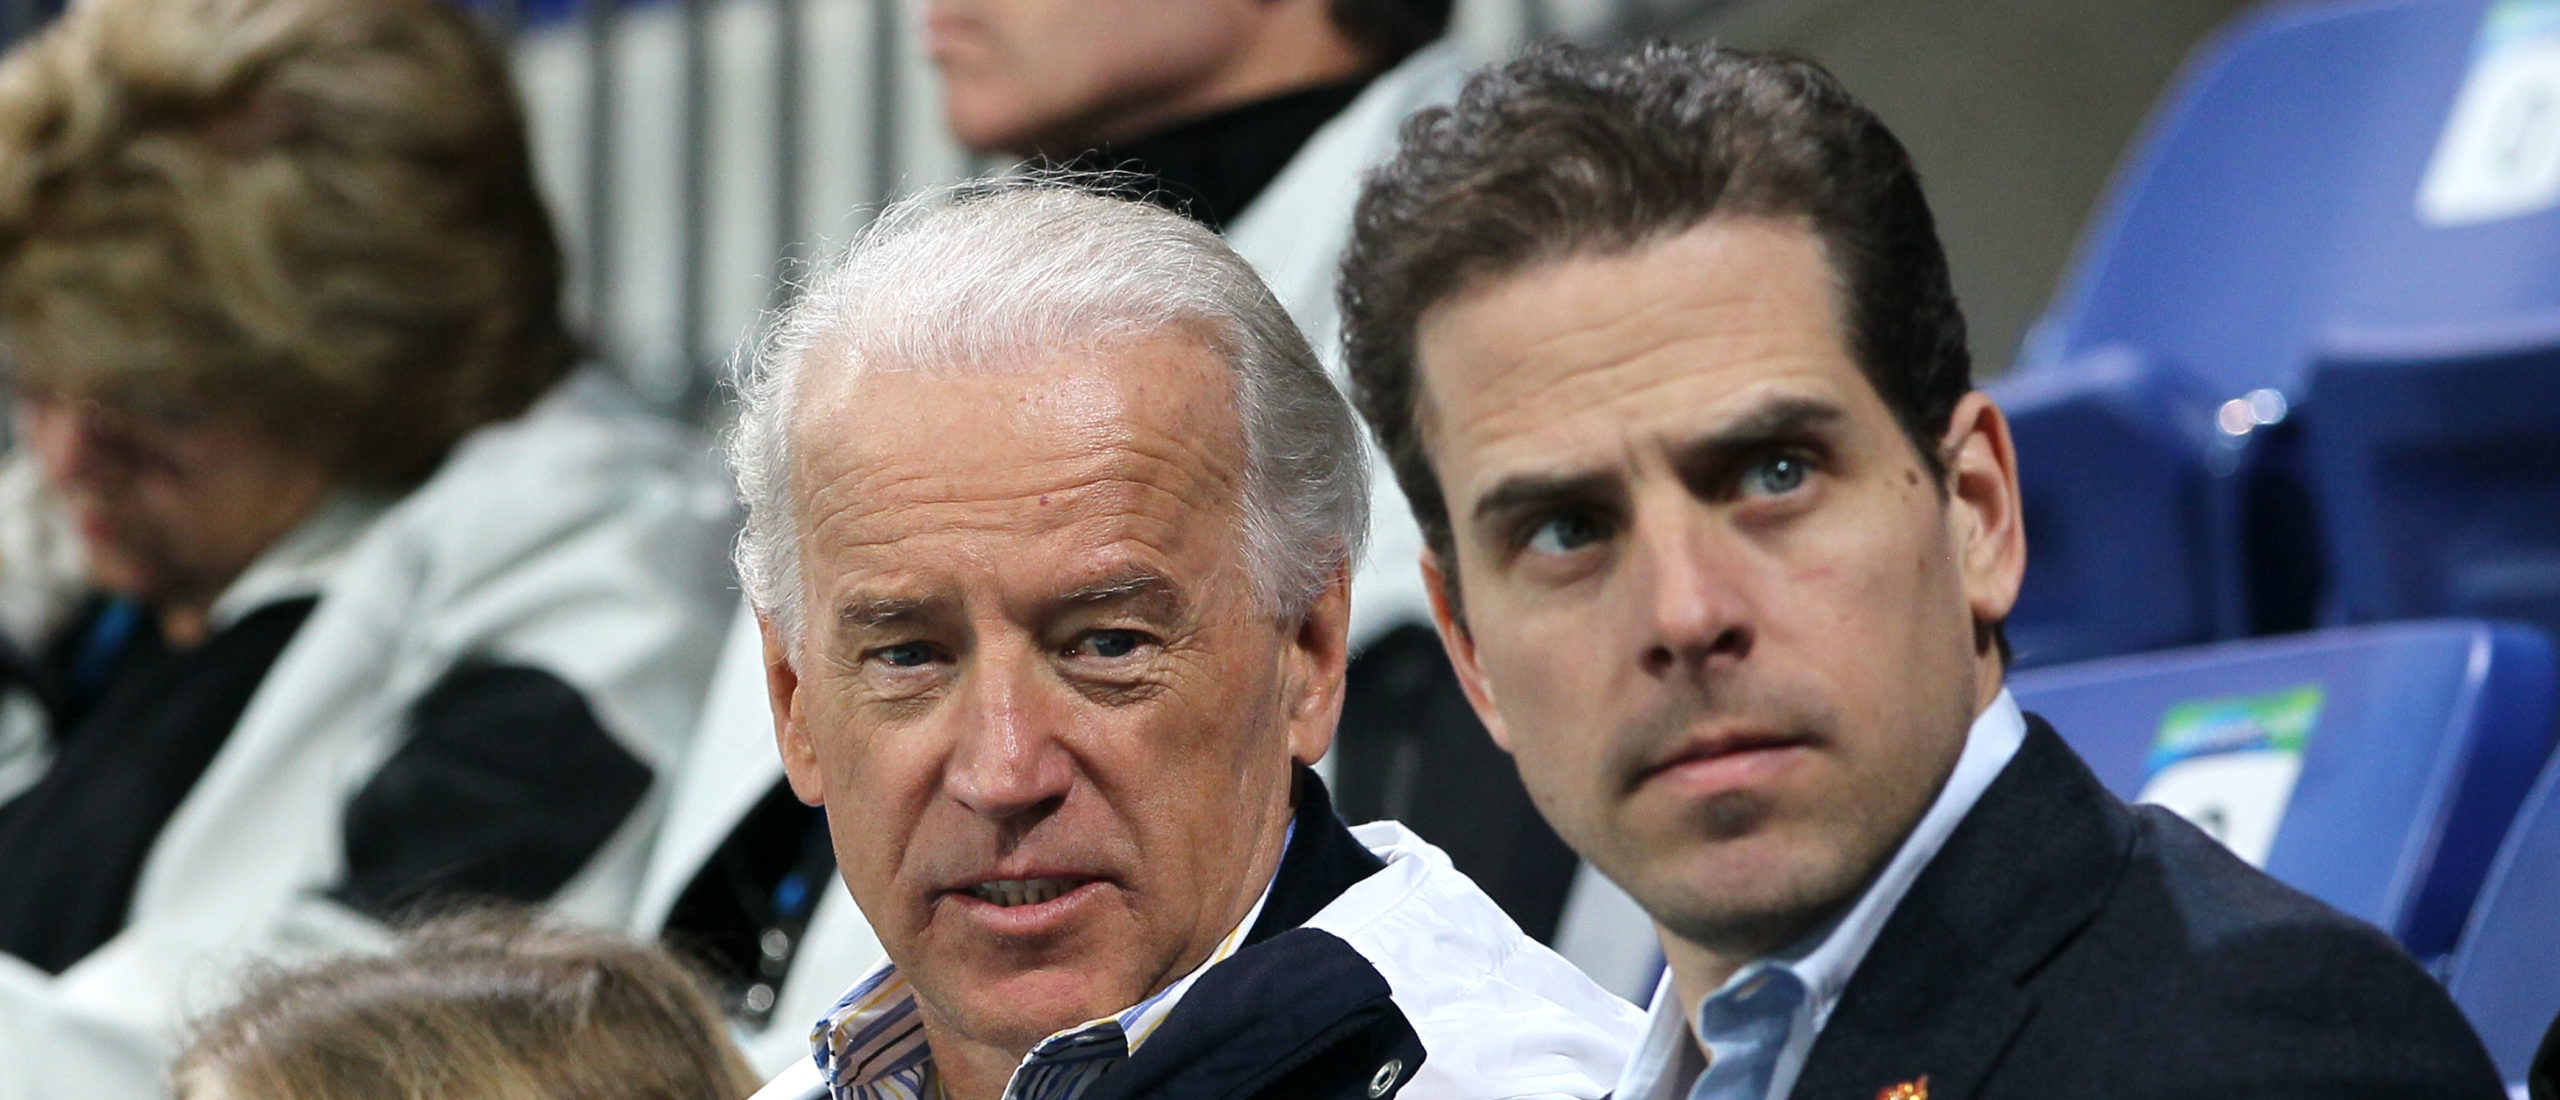 VANCOUVER, BC - FEBRUARY 14: United States vice-president Joe Biden (L) and his son Hunter Biden (R) attend a women's ice hockey preliminary game between United States and China at UBC Thunderbird Arena on February 14, 2010 in Vancouver, Canada. (Photo by Bruce Bennett/Getty Images)